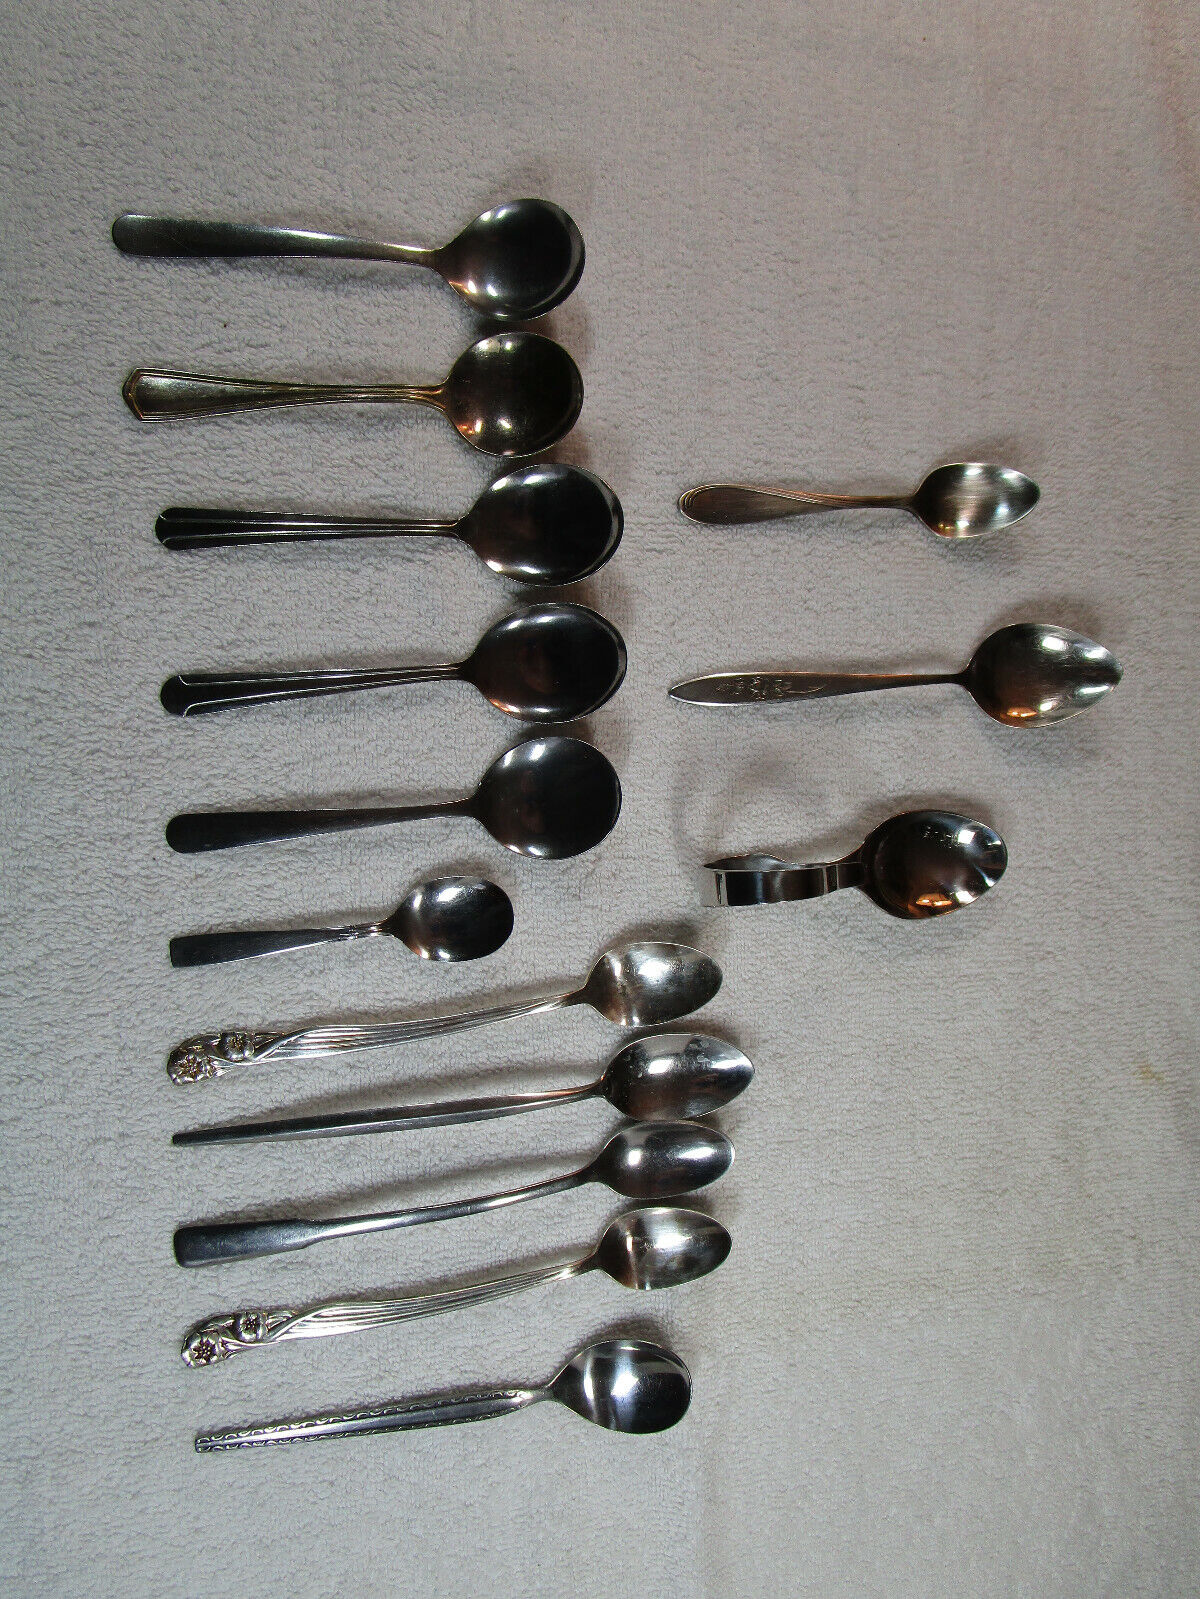 14pc Stainless Oneida Community Rogers Korea Others Mixed 117-5N